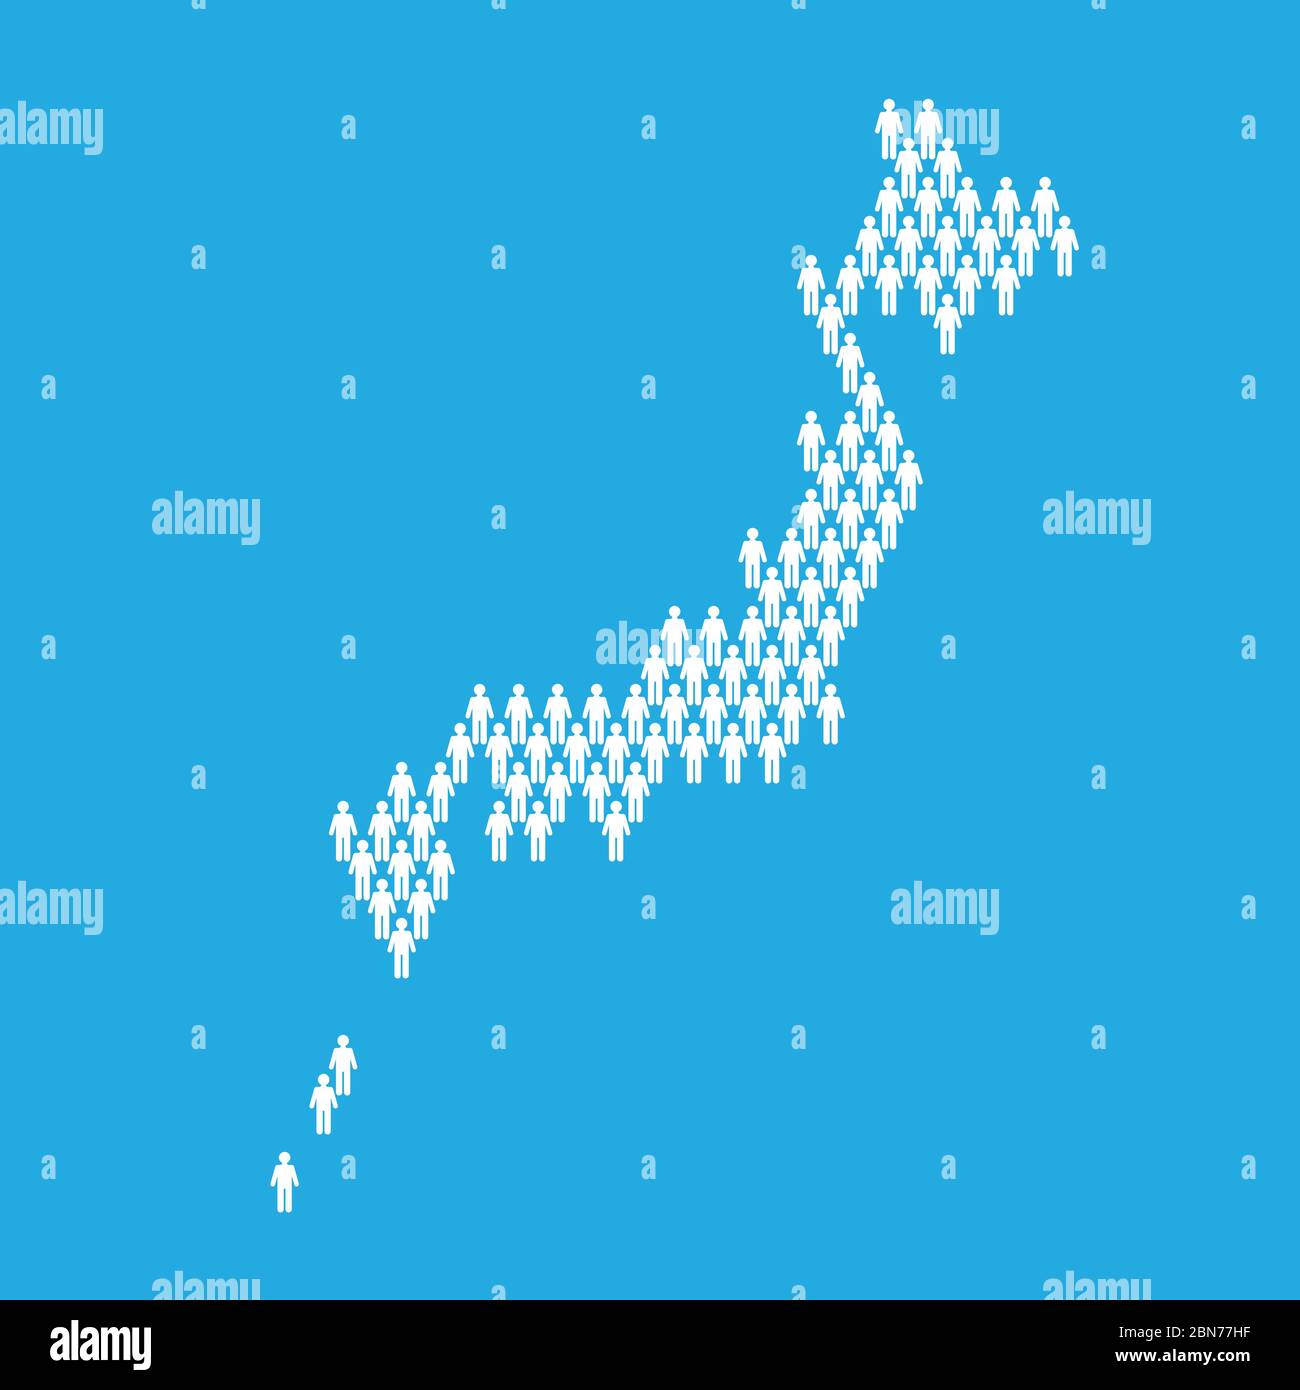 Japan population. Statistic map made from stick figure people Stock Vector